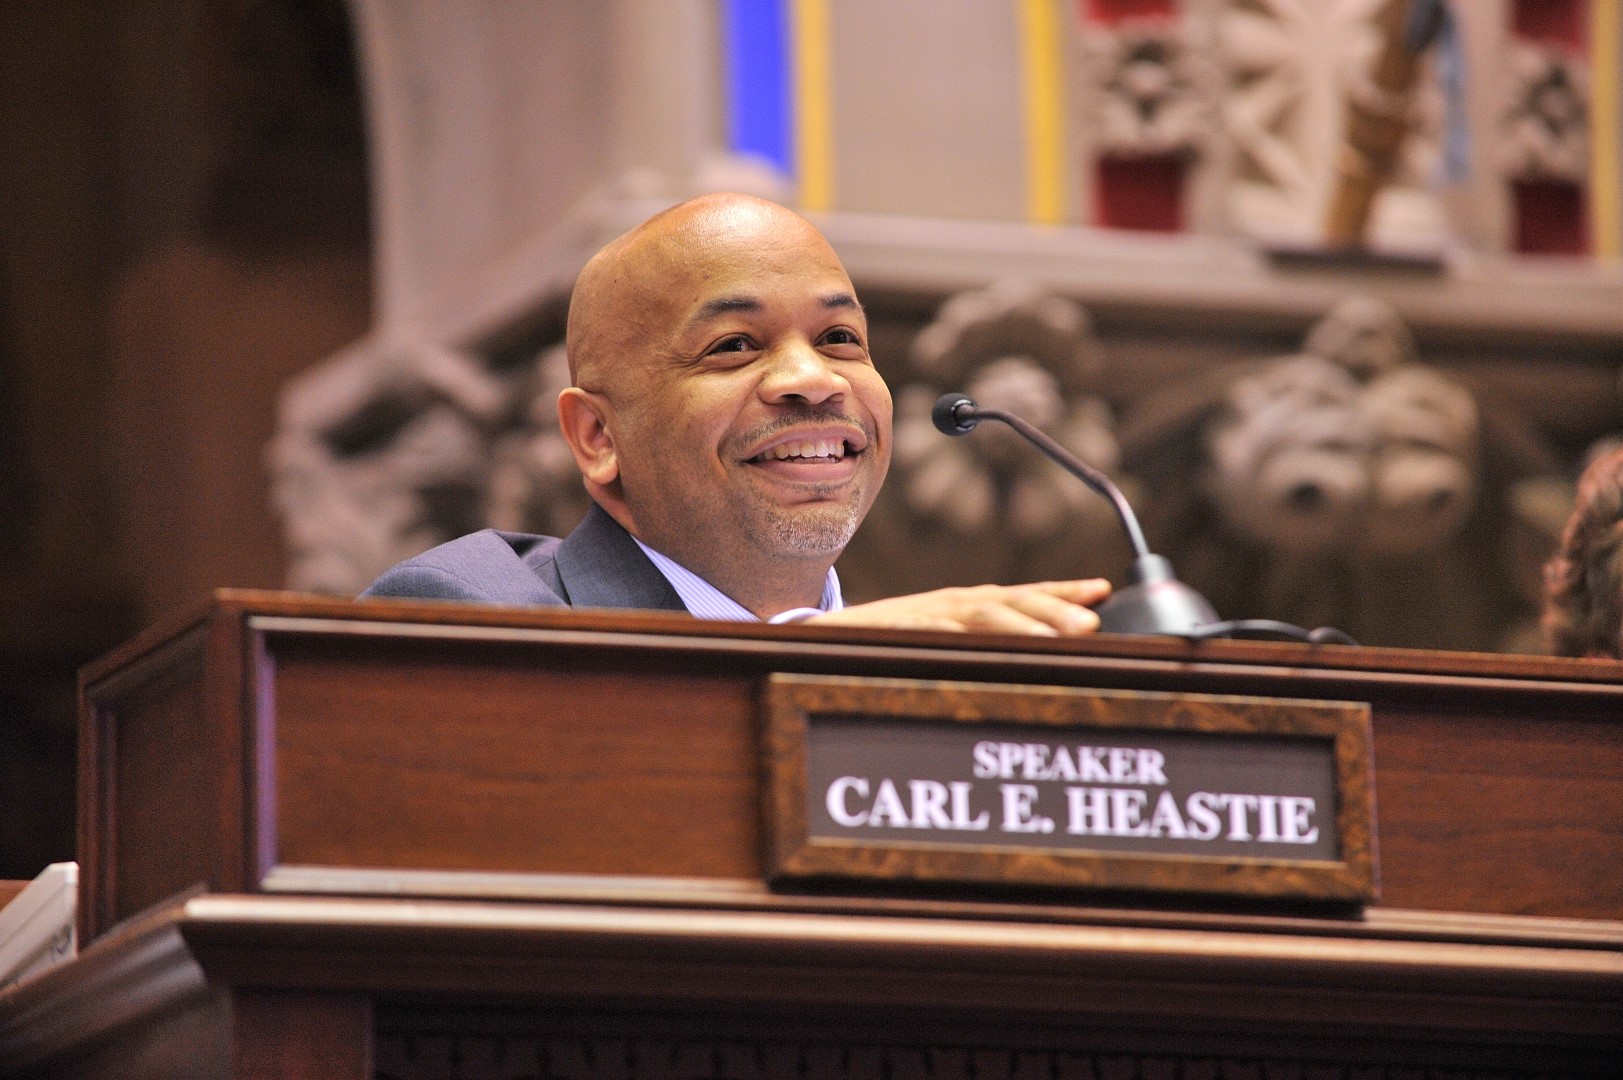 Speaker Heastie on the dais in the Assembly Chamber